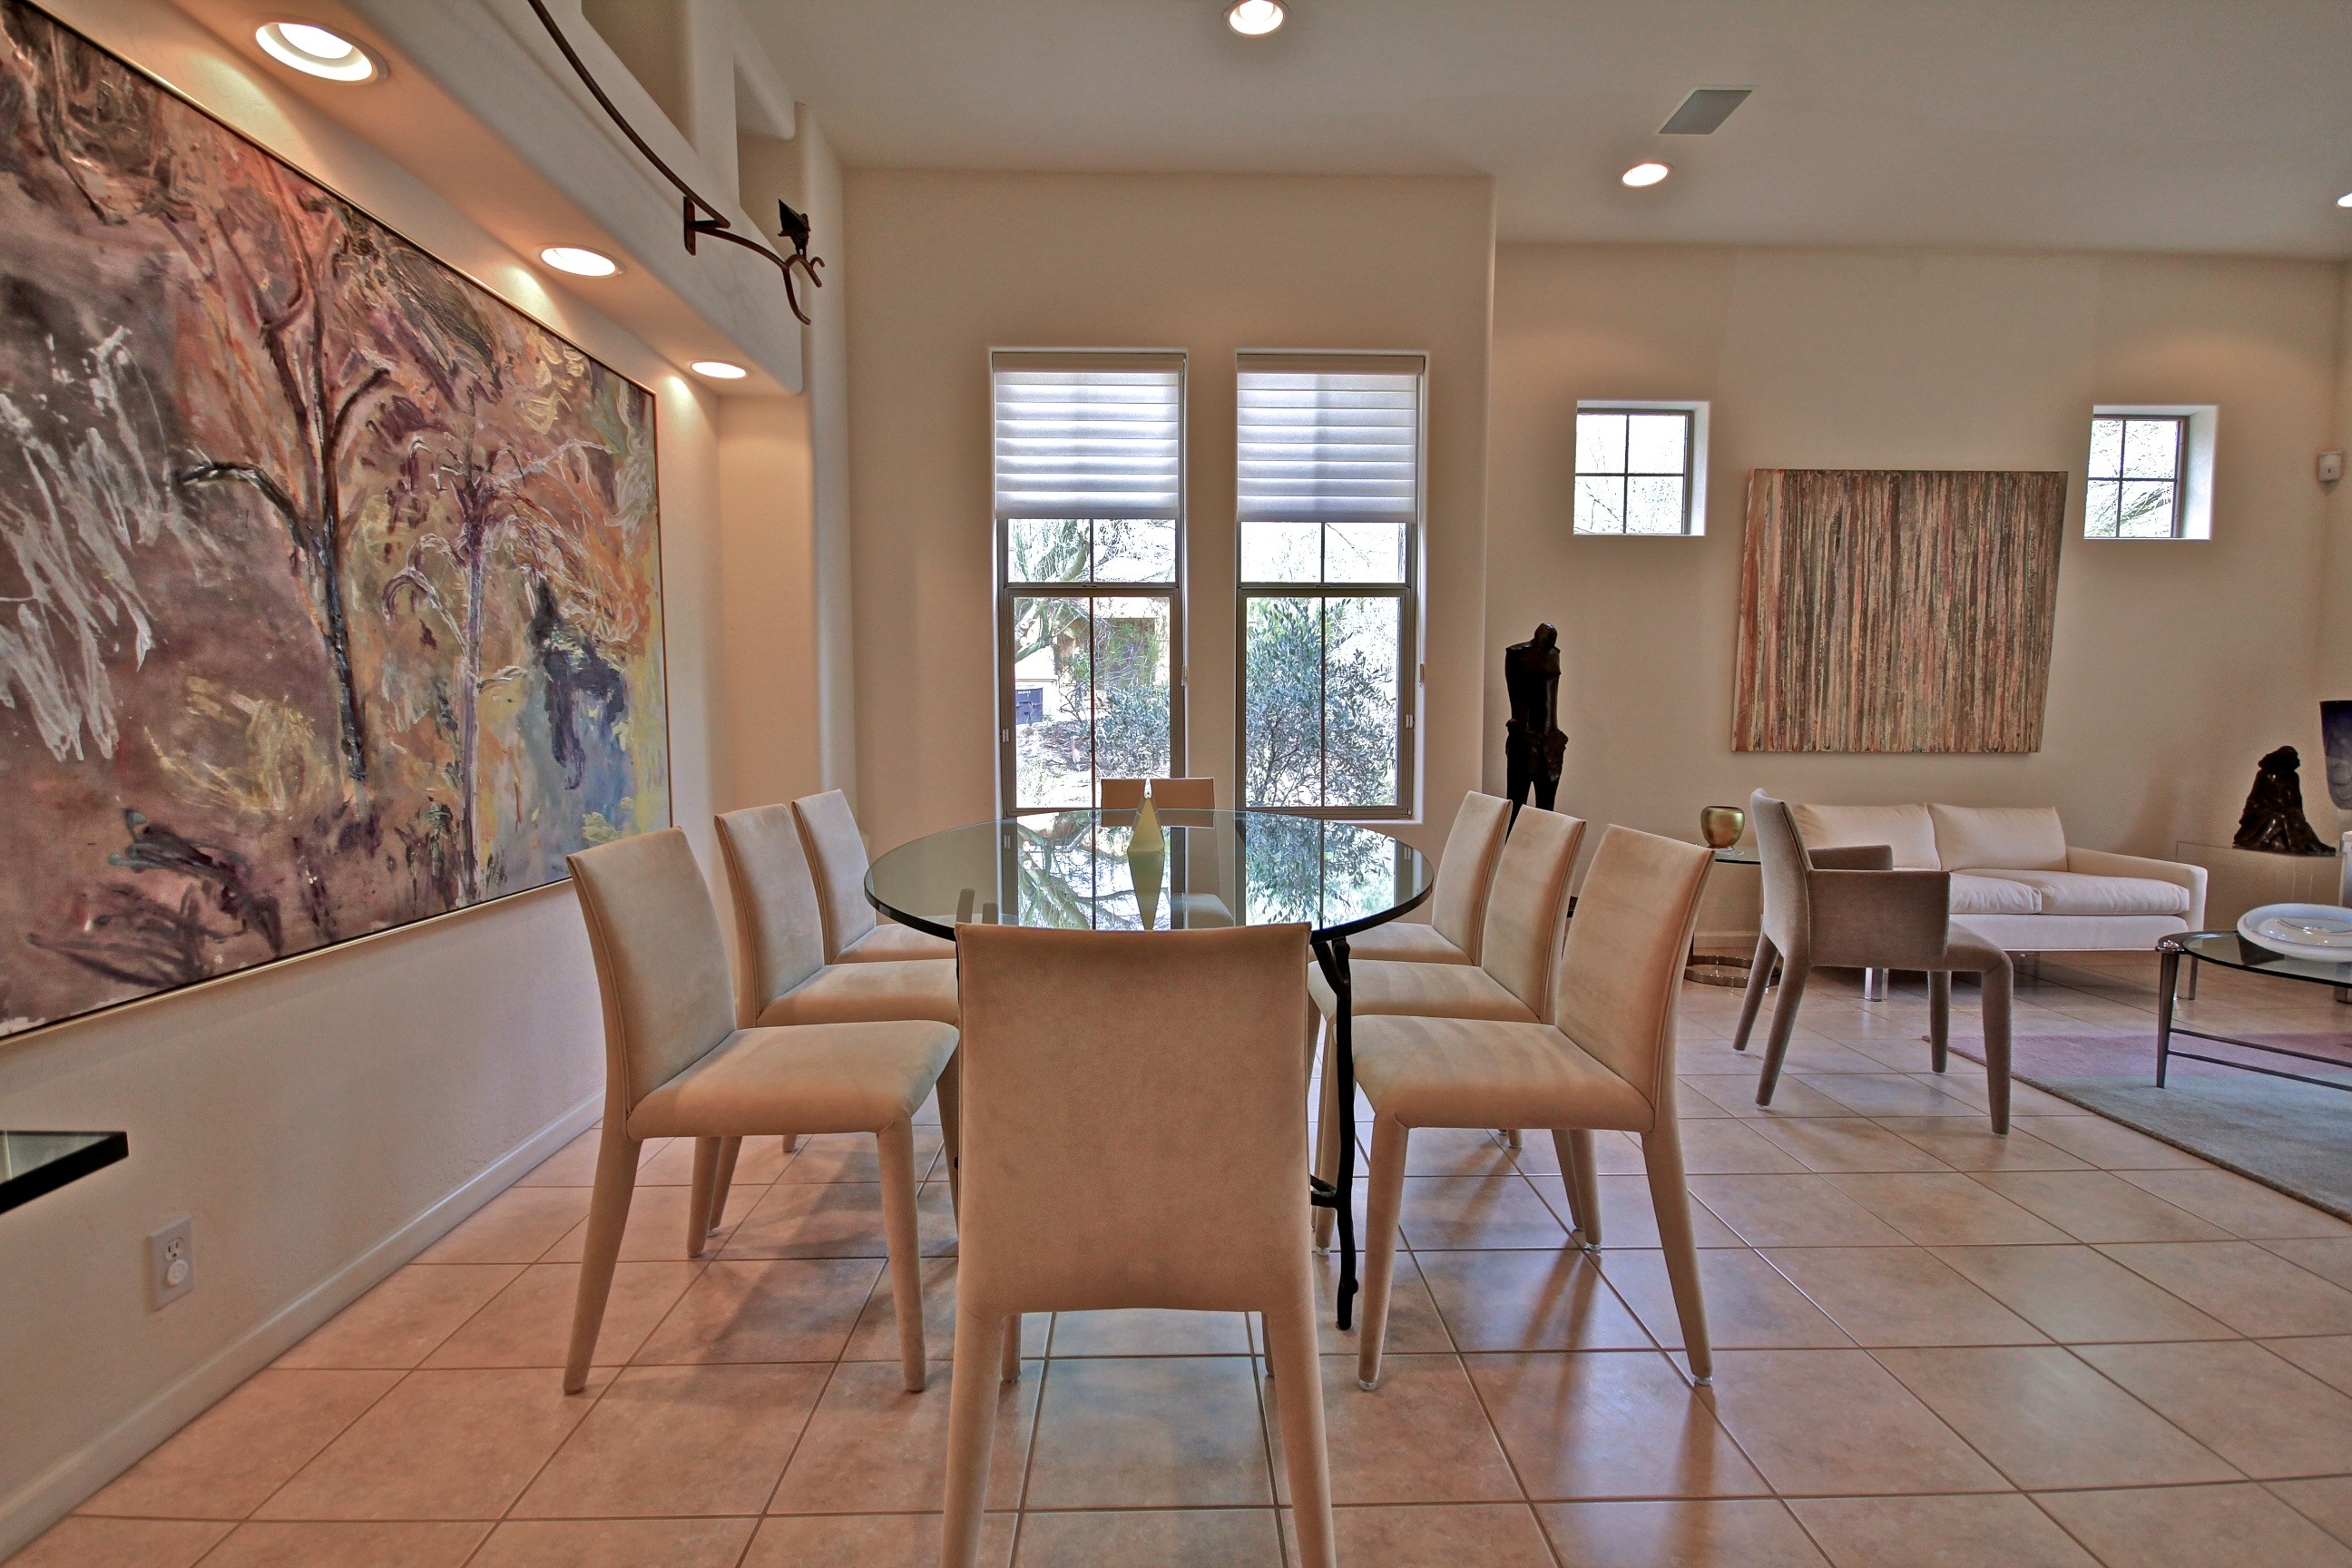 Formal dining area at this Scottsdale home for sale in DC Ranch located at 20534 N 95th St Scottsdale, AZ 85255 listed by Don Matheson at The Matheson Team